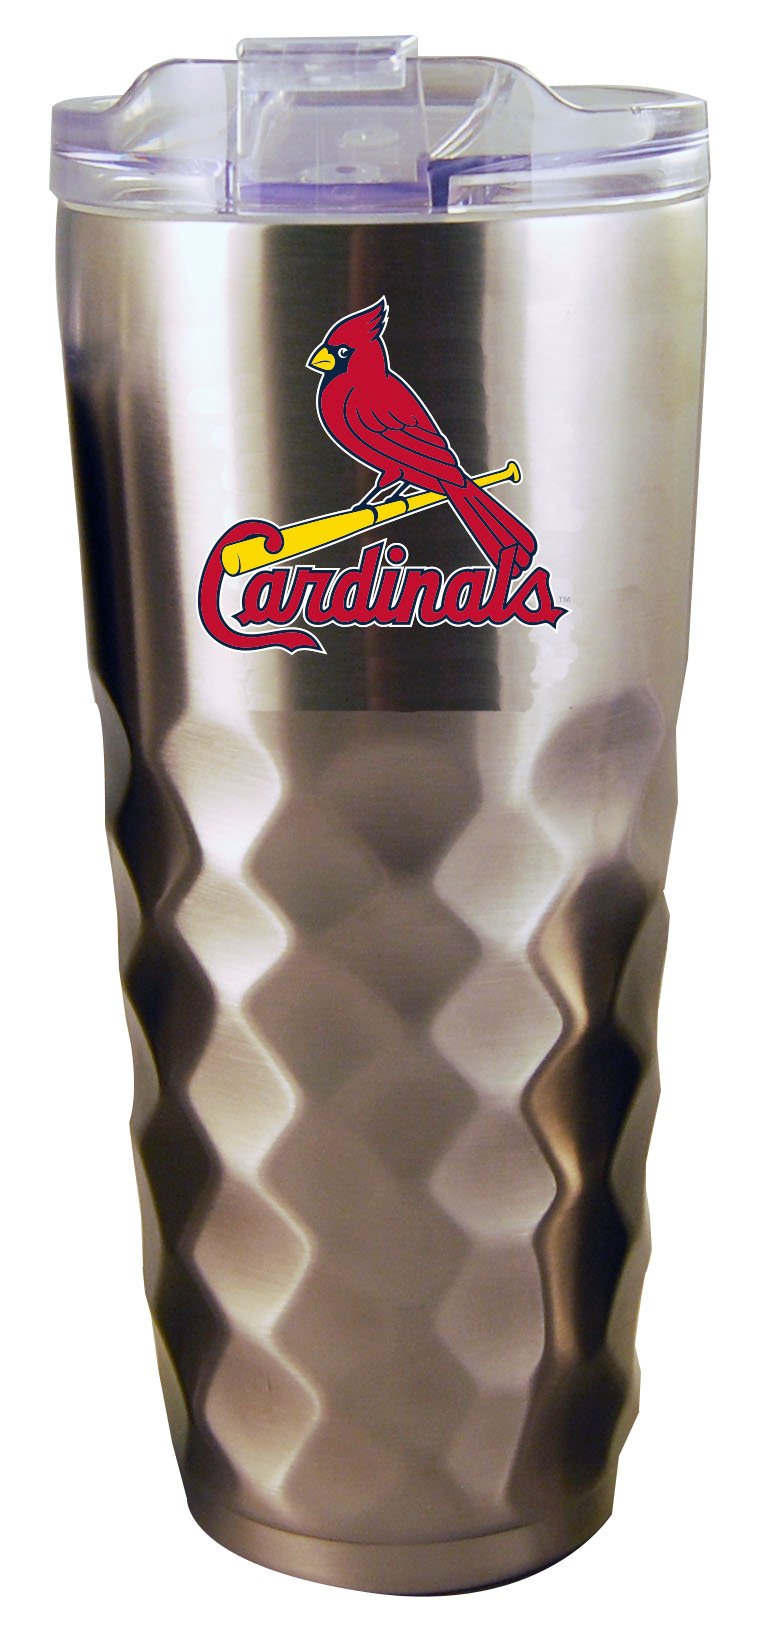 32OZ SS DIAMD TMBLR CARDINALS
CurrentProduct, Drinkware_category_All, MLB, SLC, St Louis Cardinals
The Memory Company